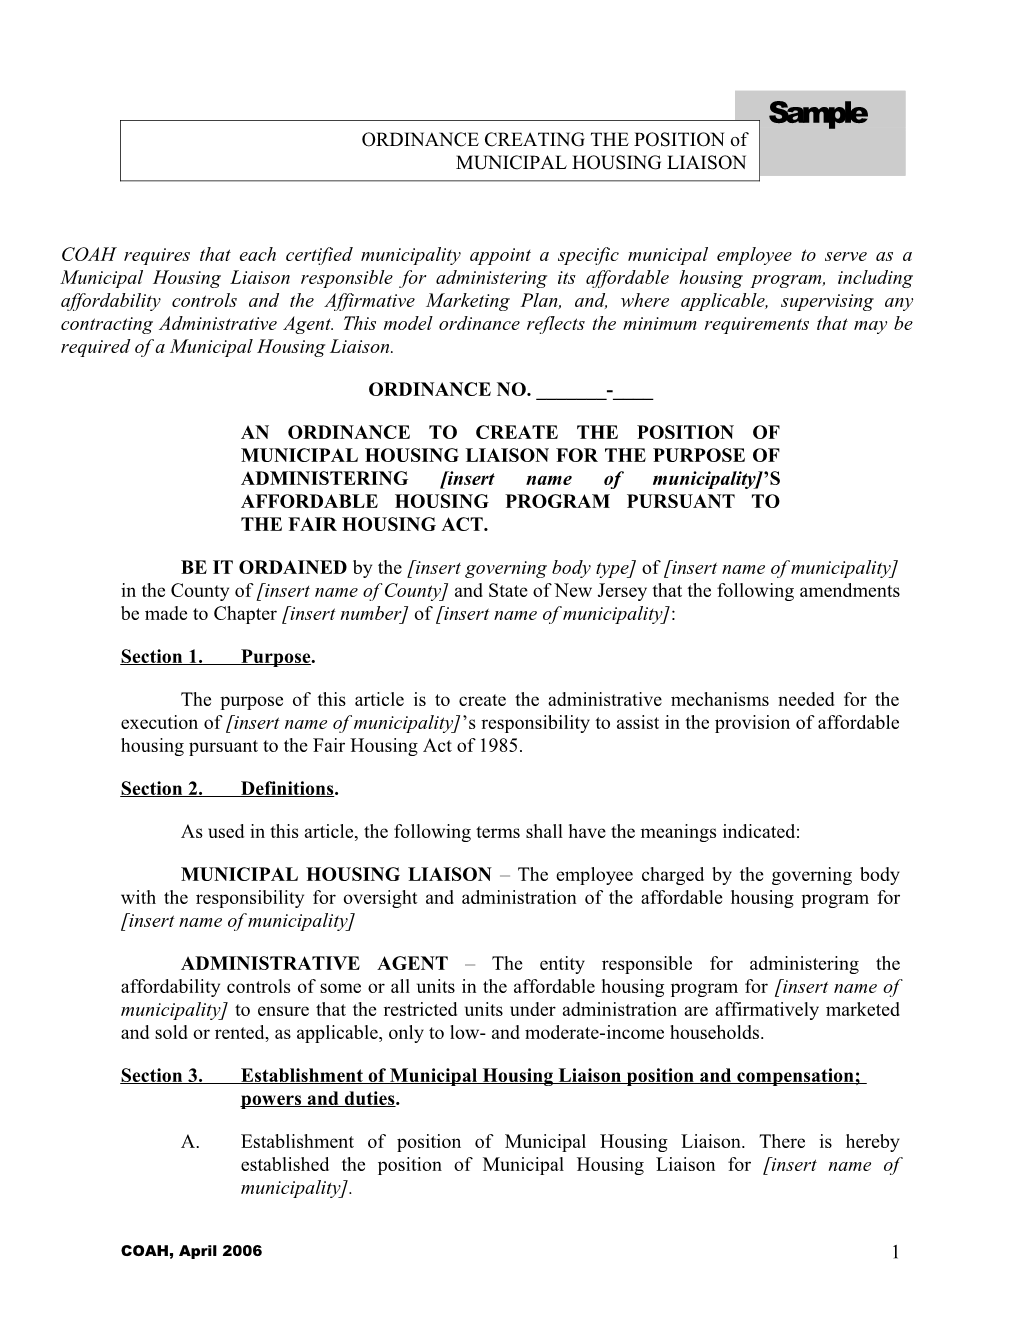 An Ordinance to Create the Position of Municipal Housing Liaison for the Purpose Of